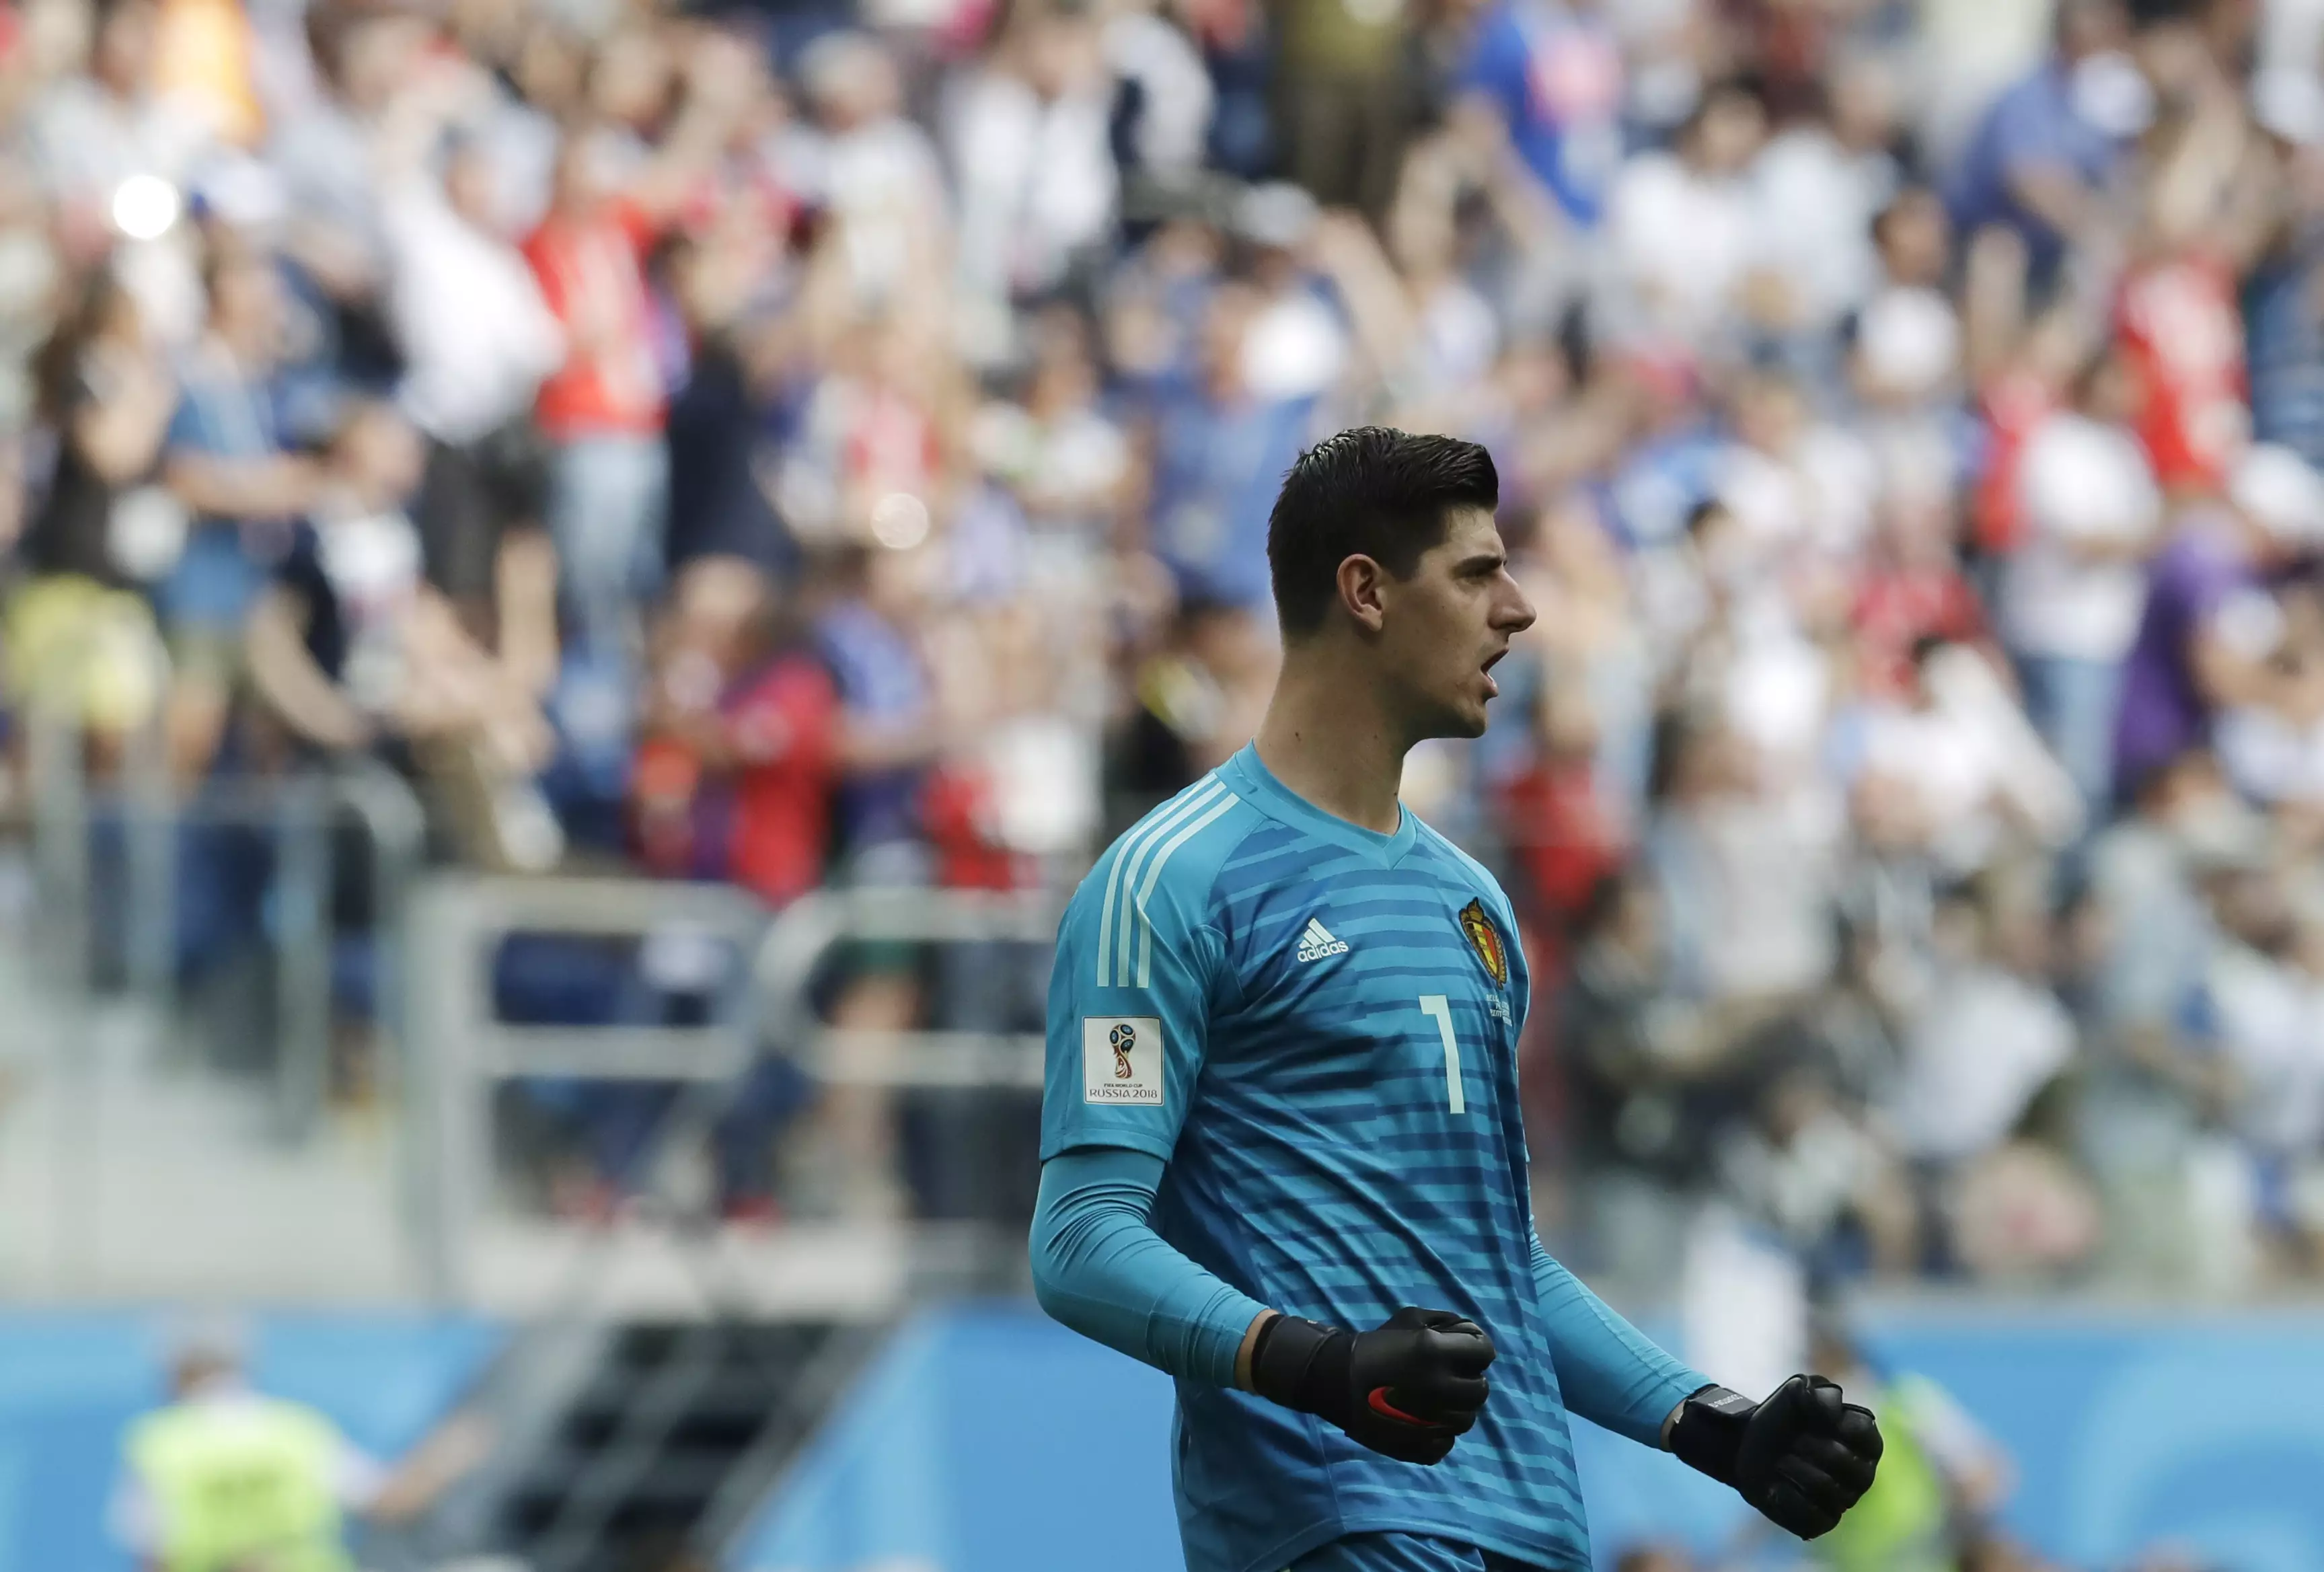 Courtois had a brilliant World Cup, winning the Golden Glove award. Image: PA Images